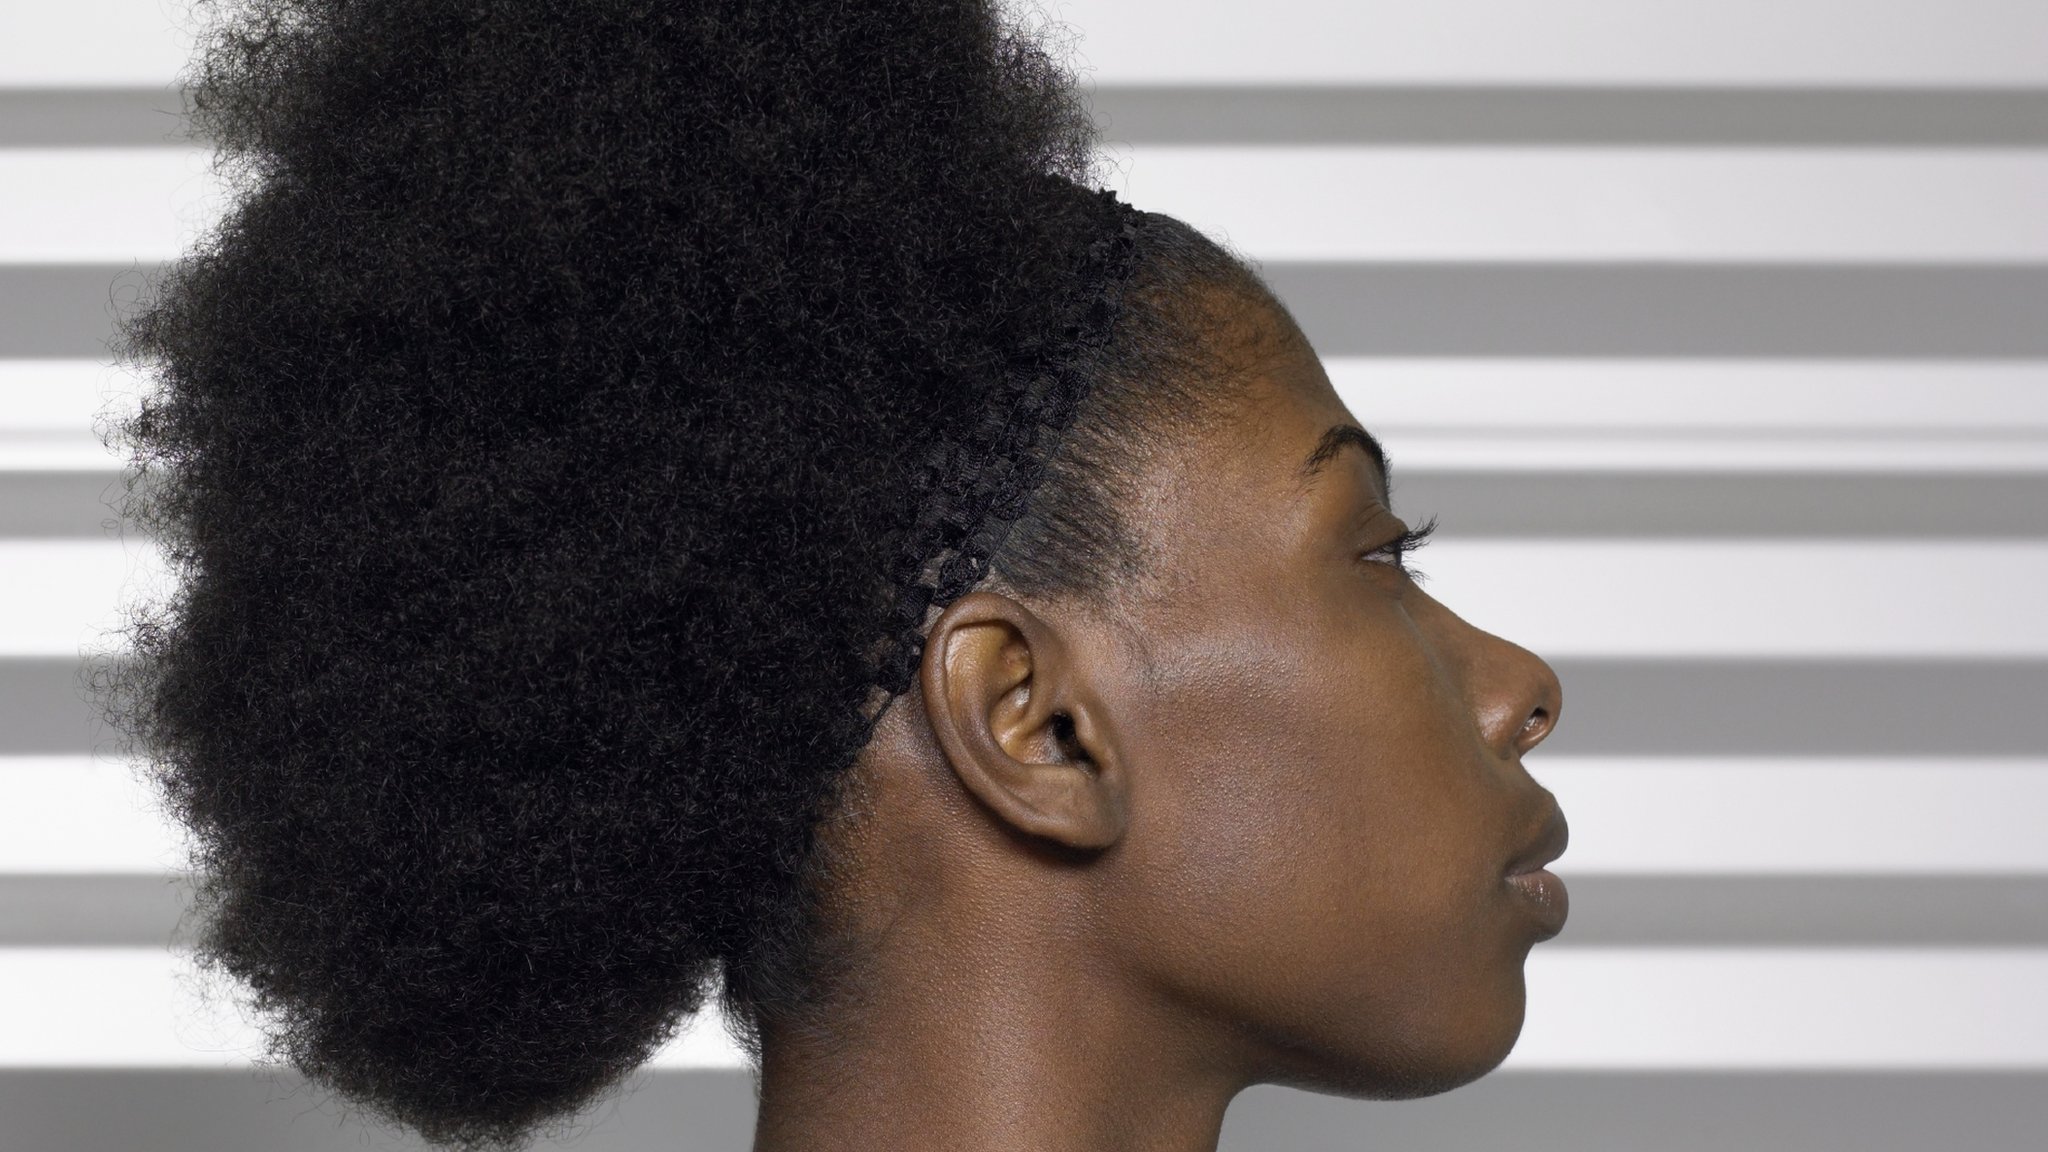 The women saying no, 'afropuff' hair is not unruly - BBC News